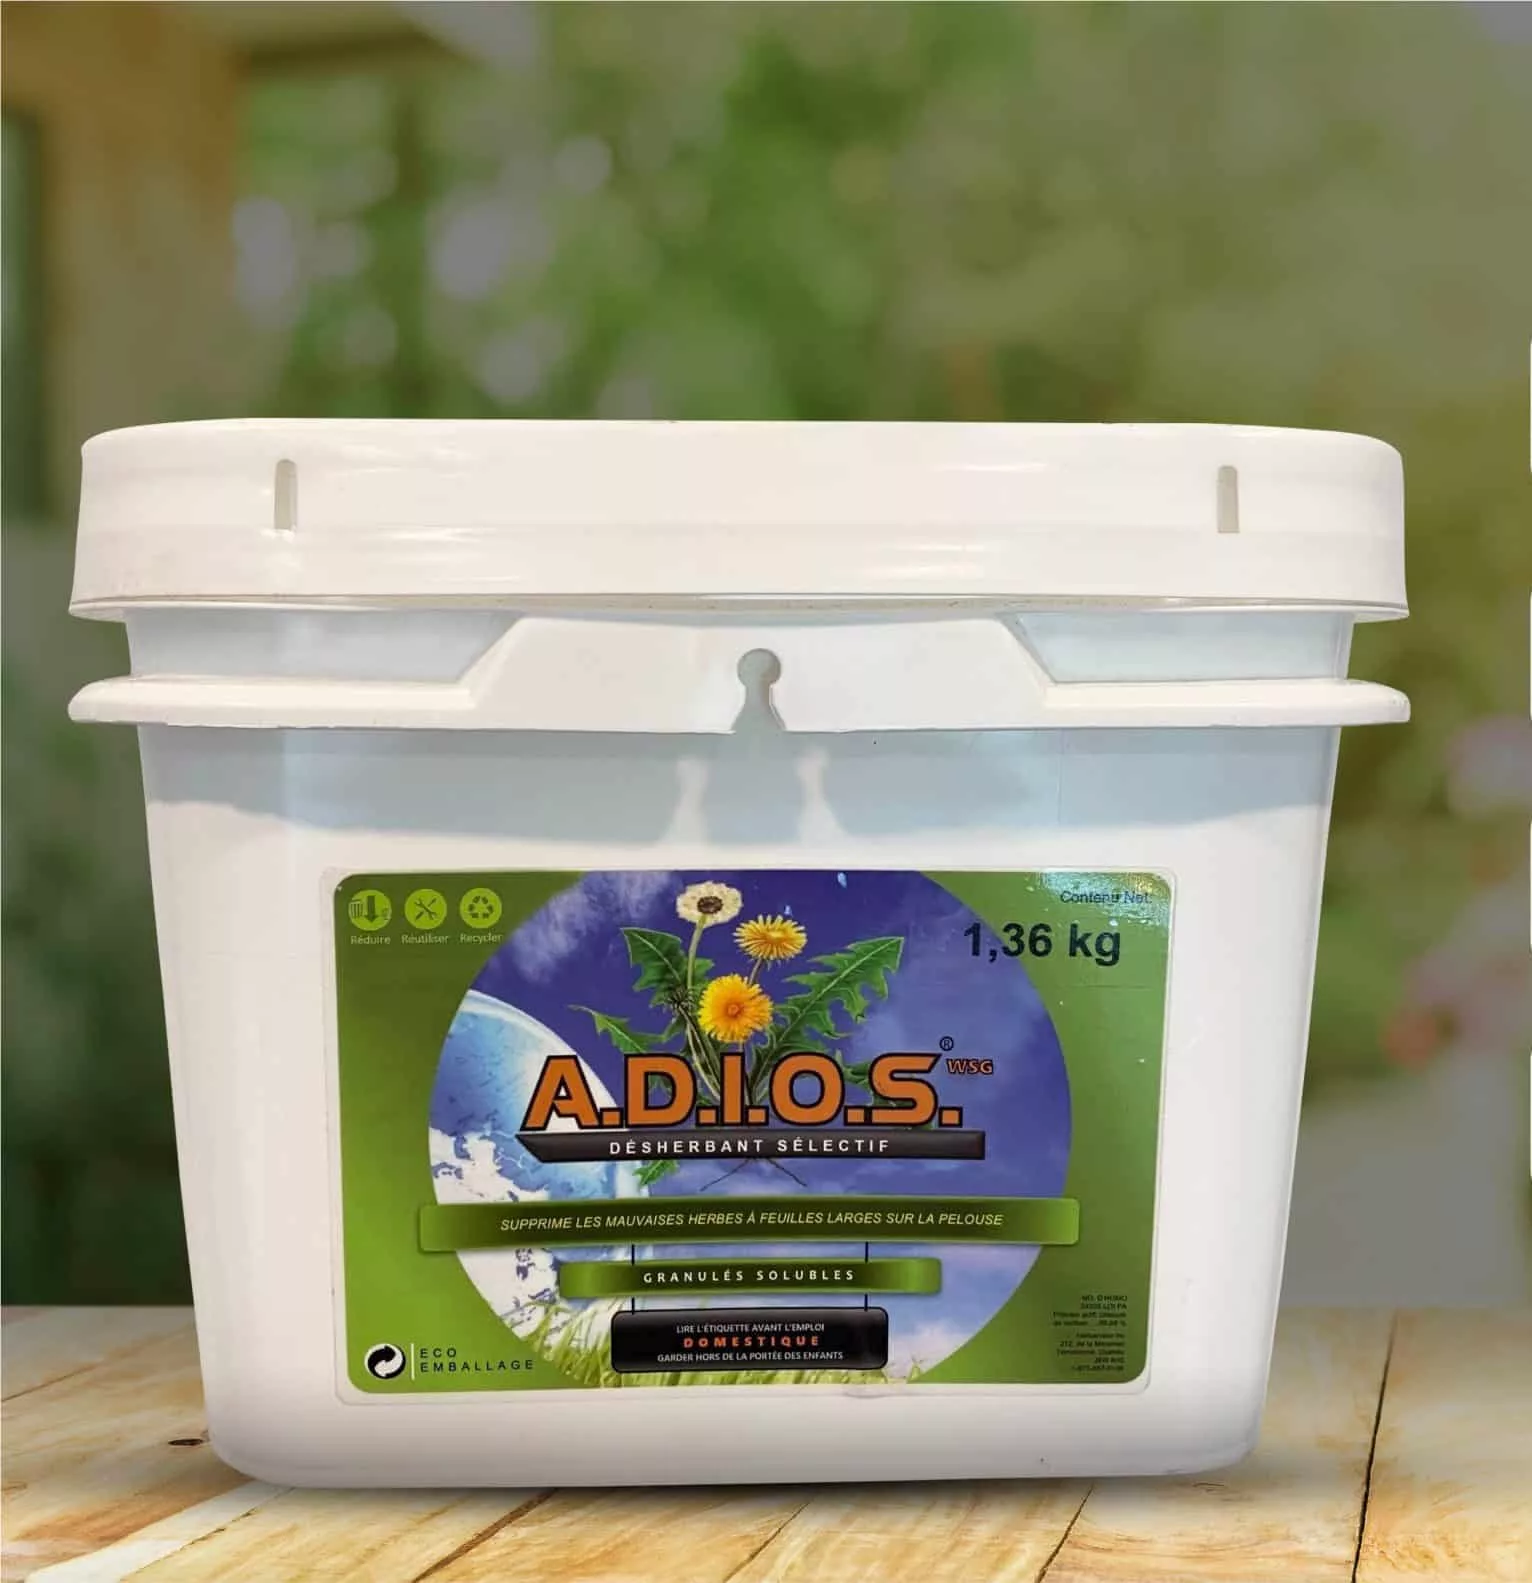 A.D.I.O.S. 2.27Kg Organic Herbicide Concentrate 01 scaled 1 jpg